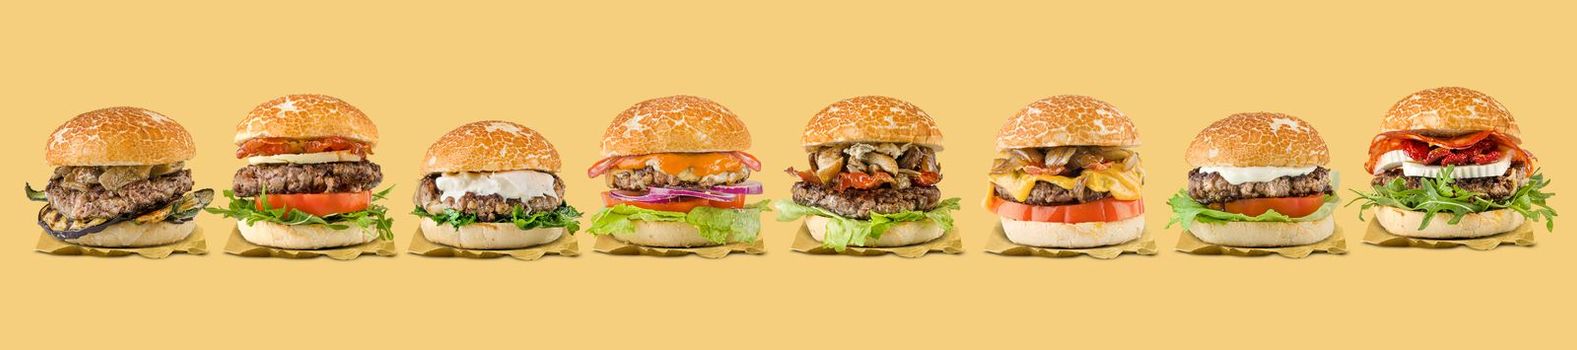 Special Hamburger group on yellow background